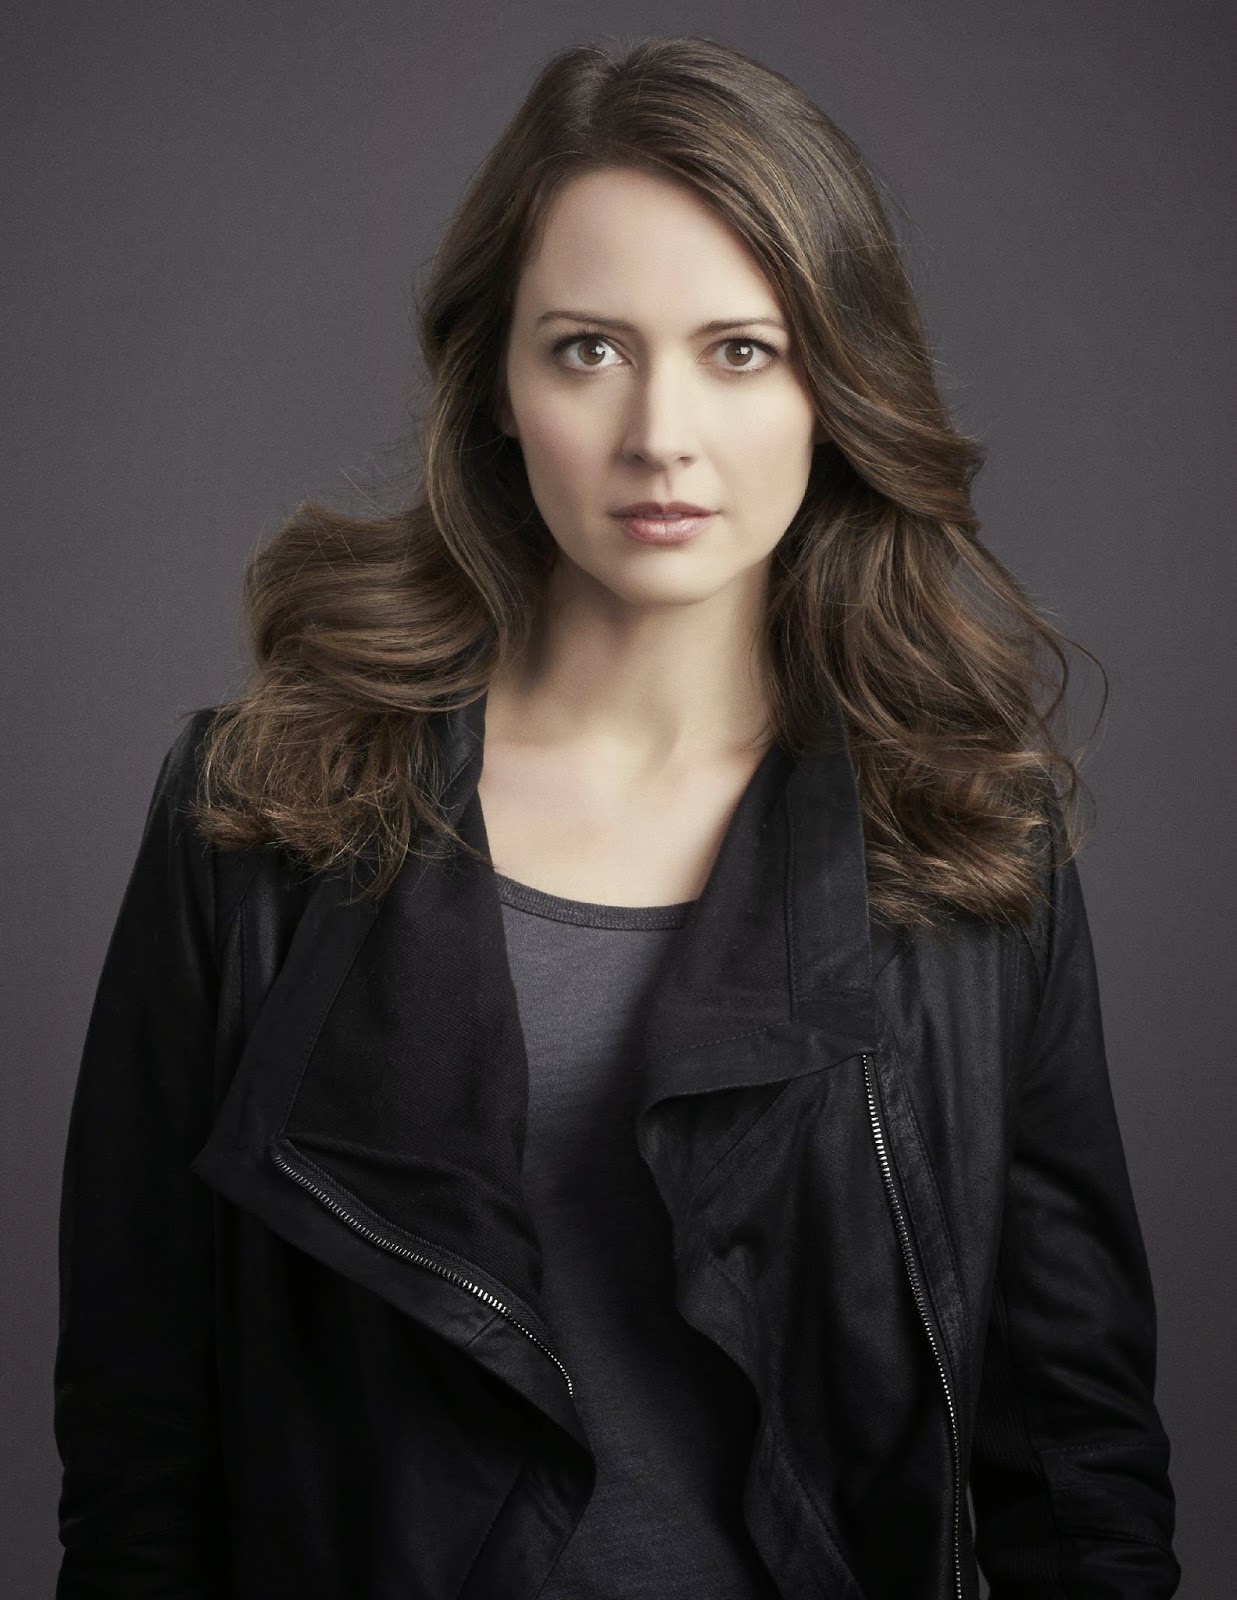 Amy Acker Profile,Biography and Latest Pictures/Photos 